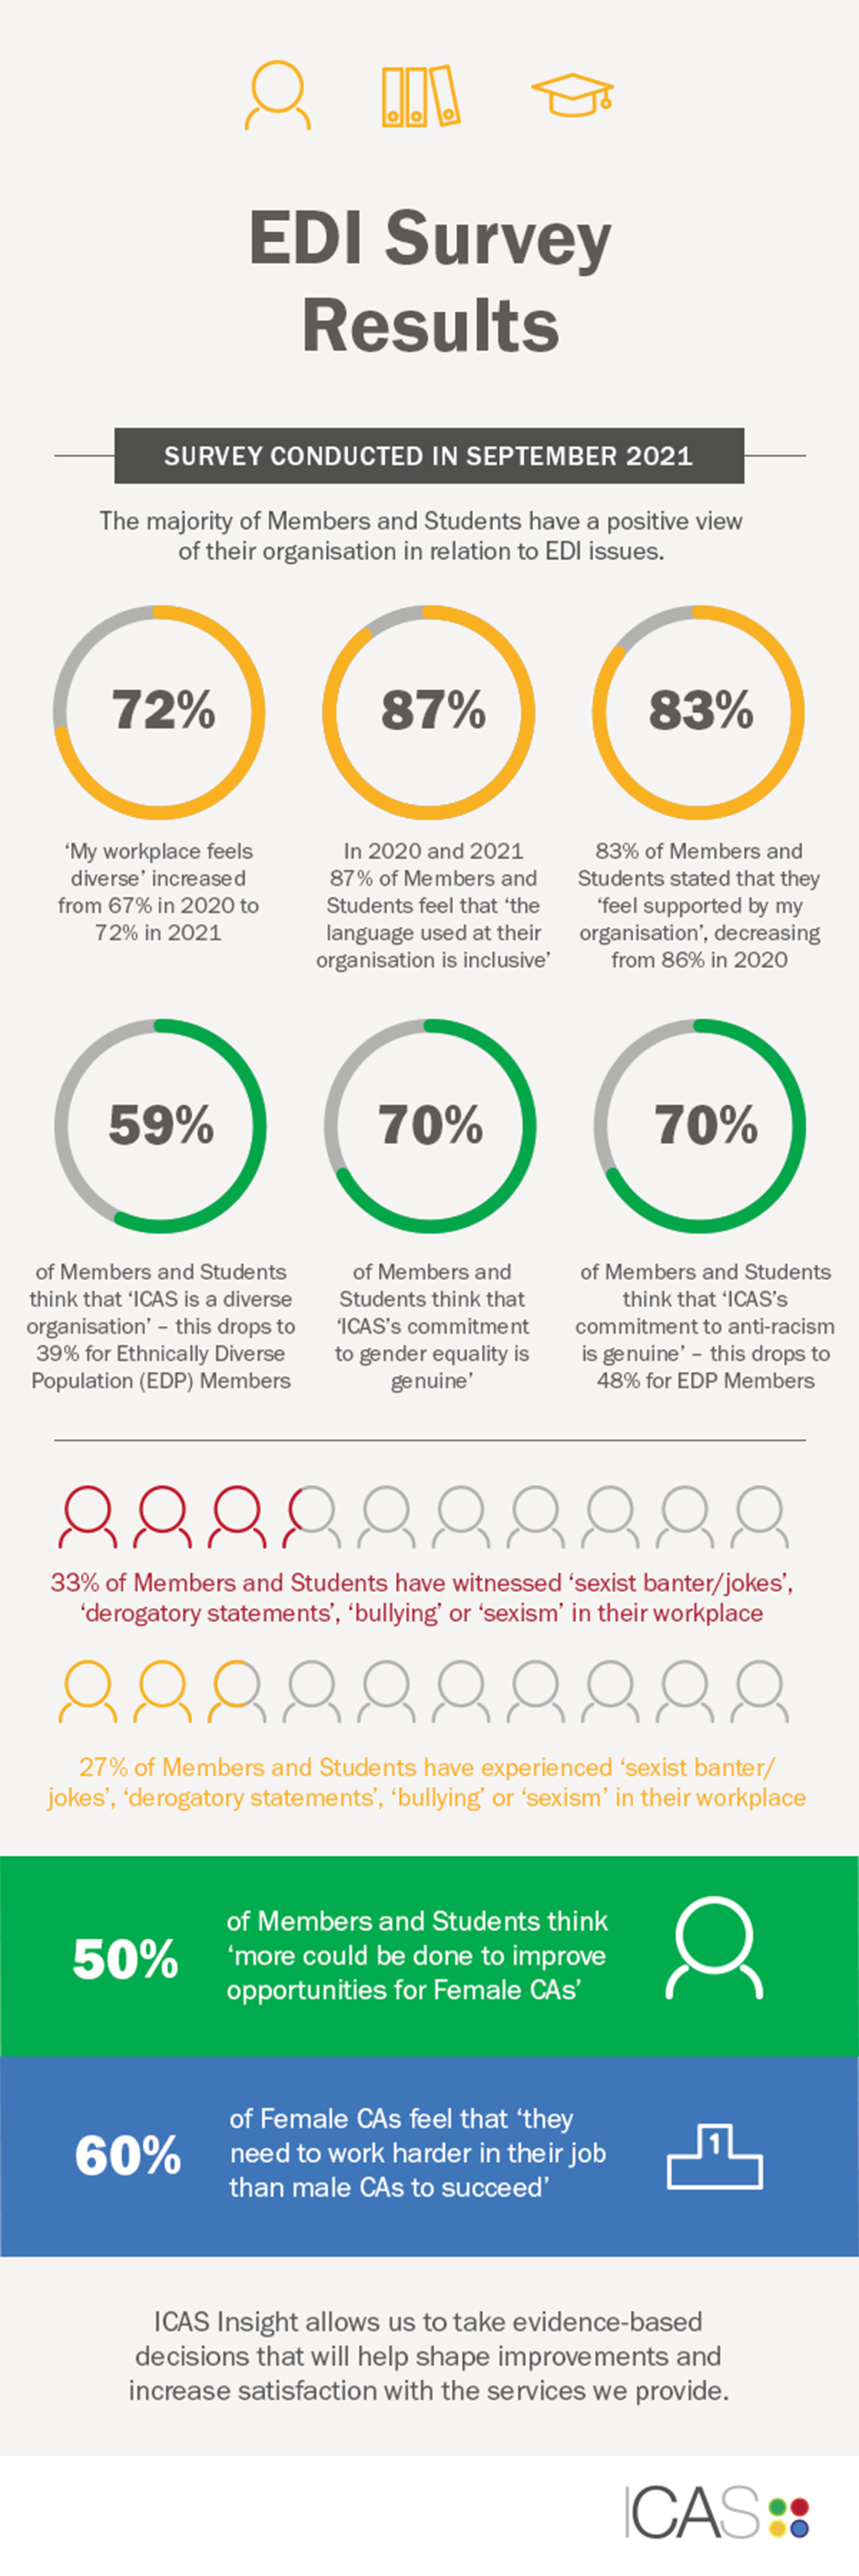 Infographic containing top-level survey data